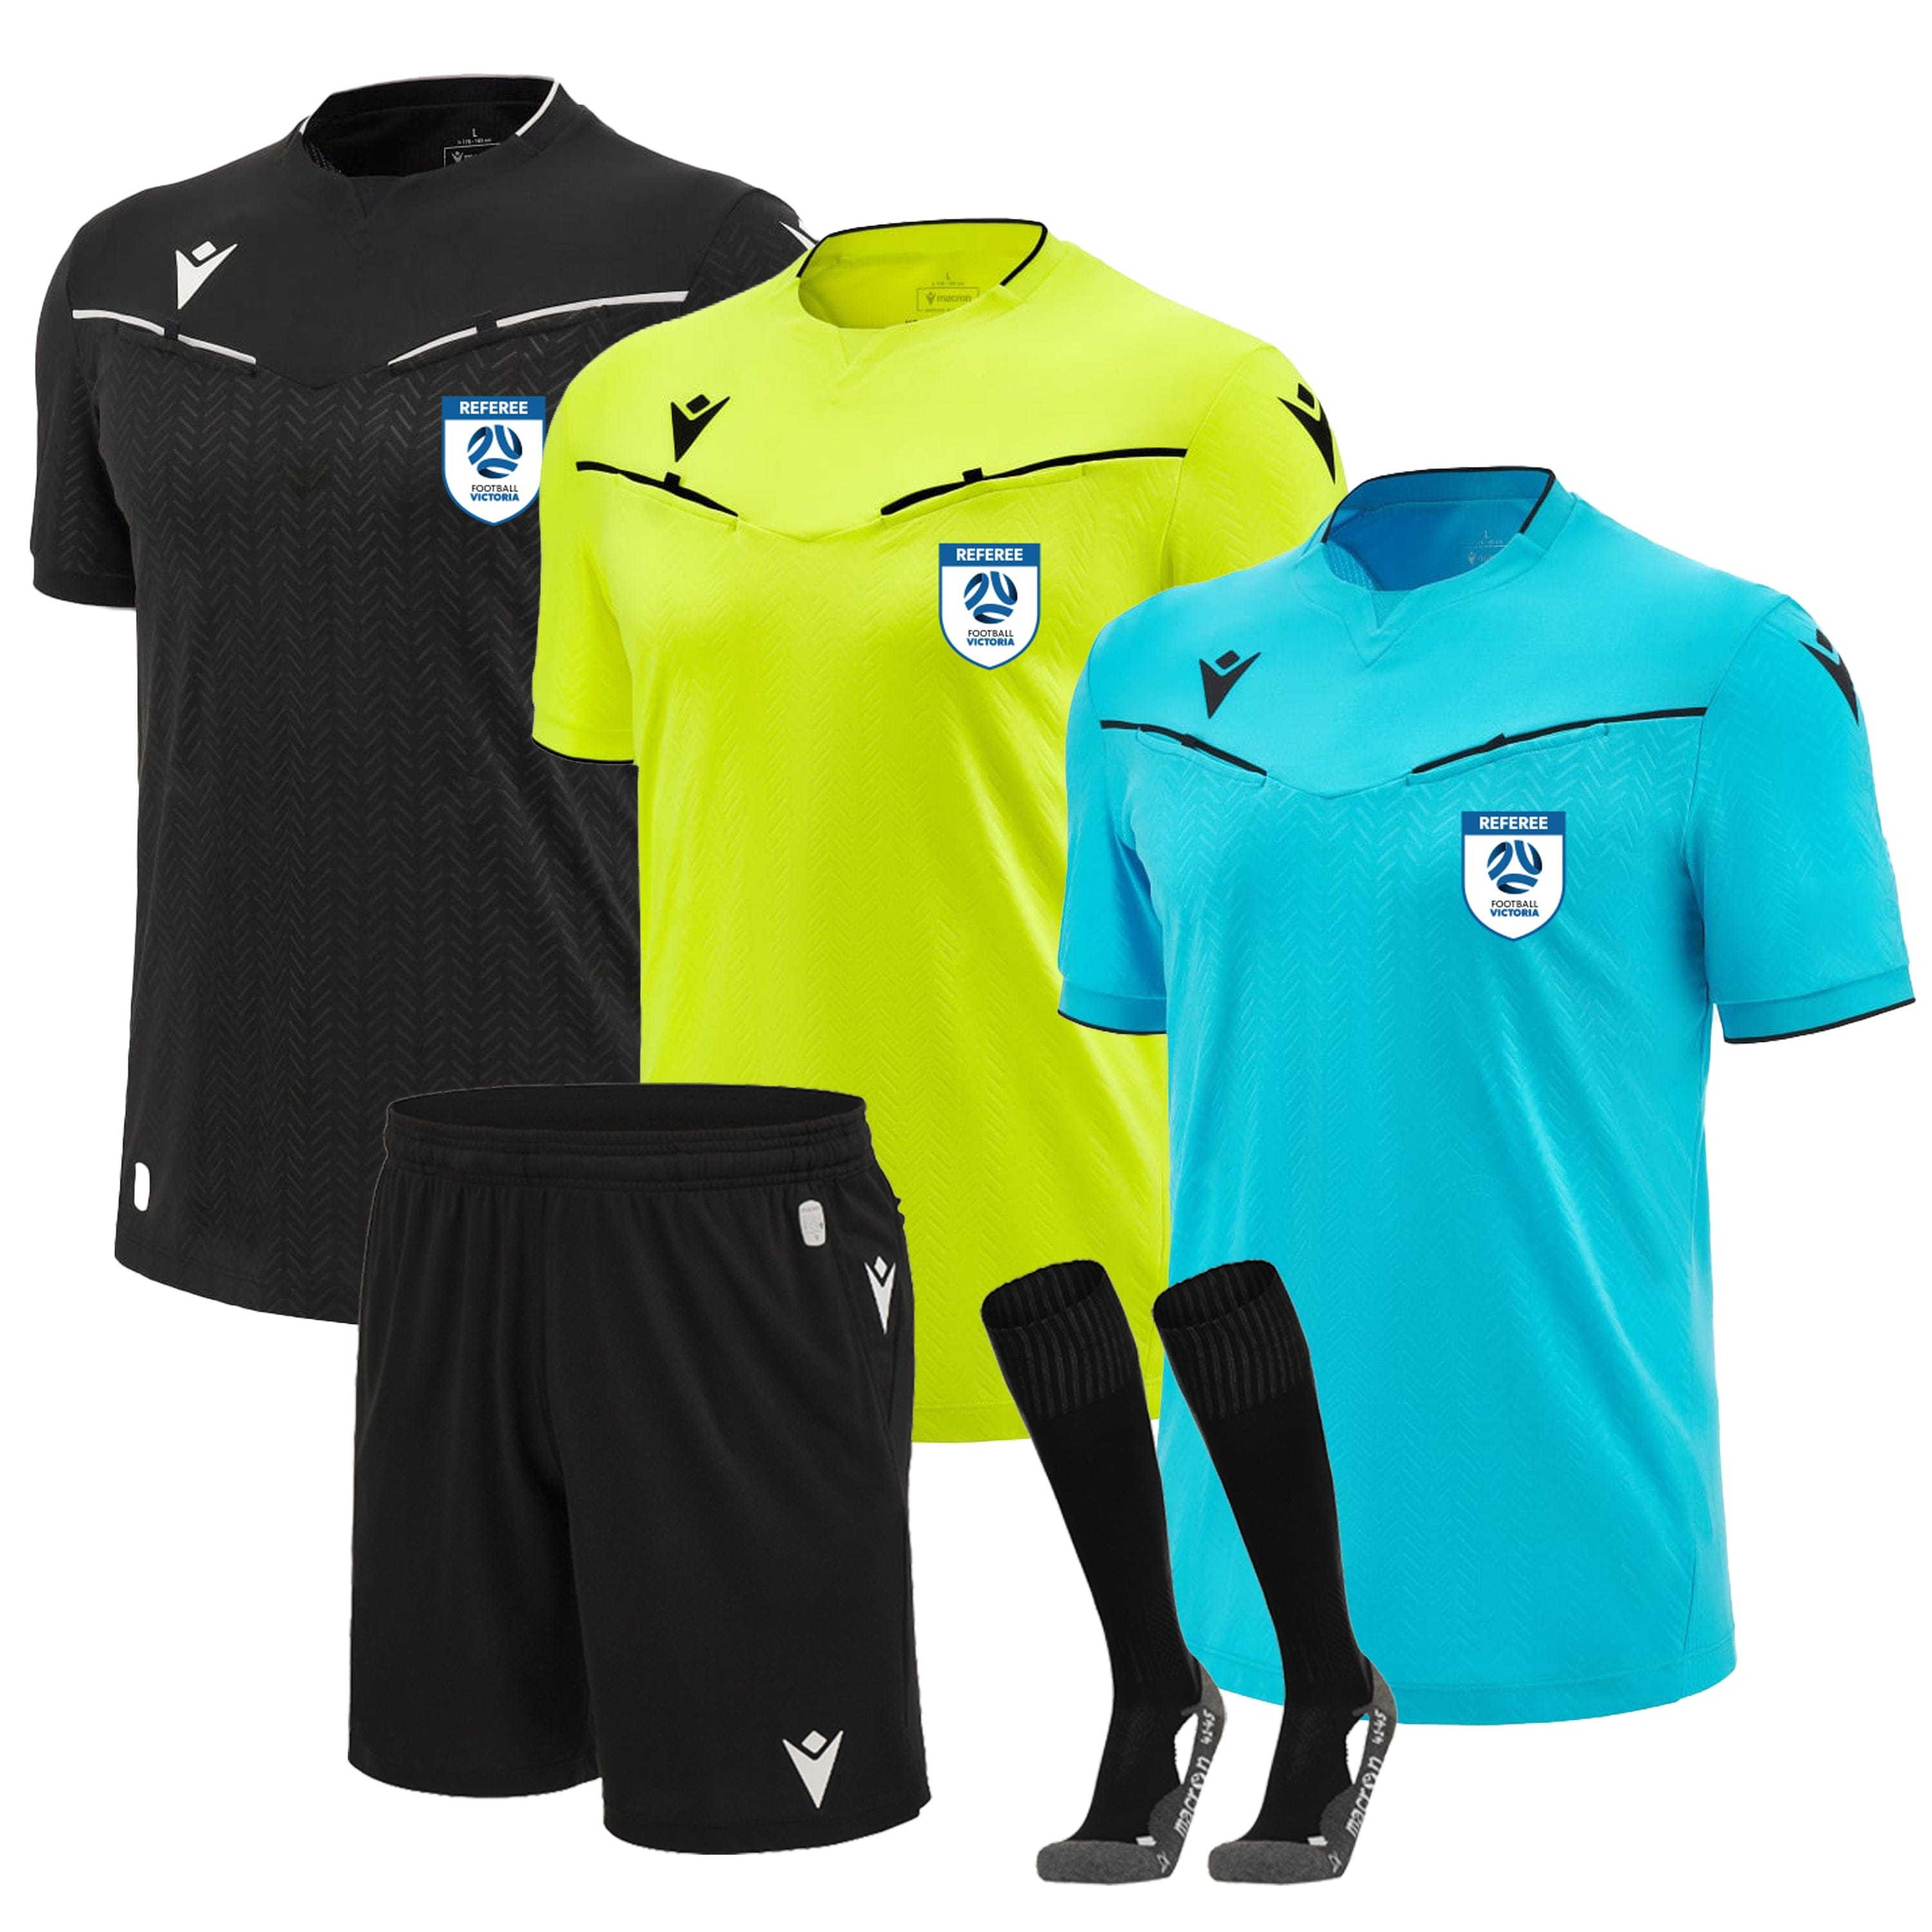 FV REFEREES PACKAGE 1